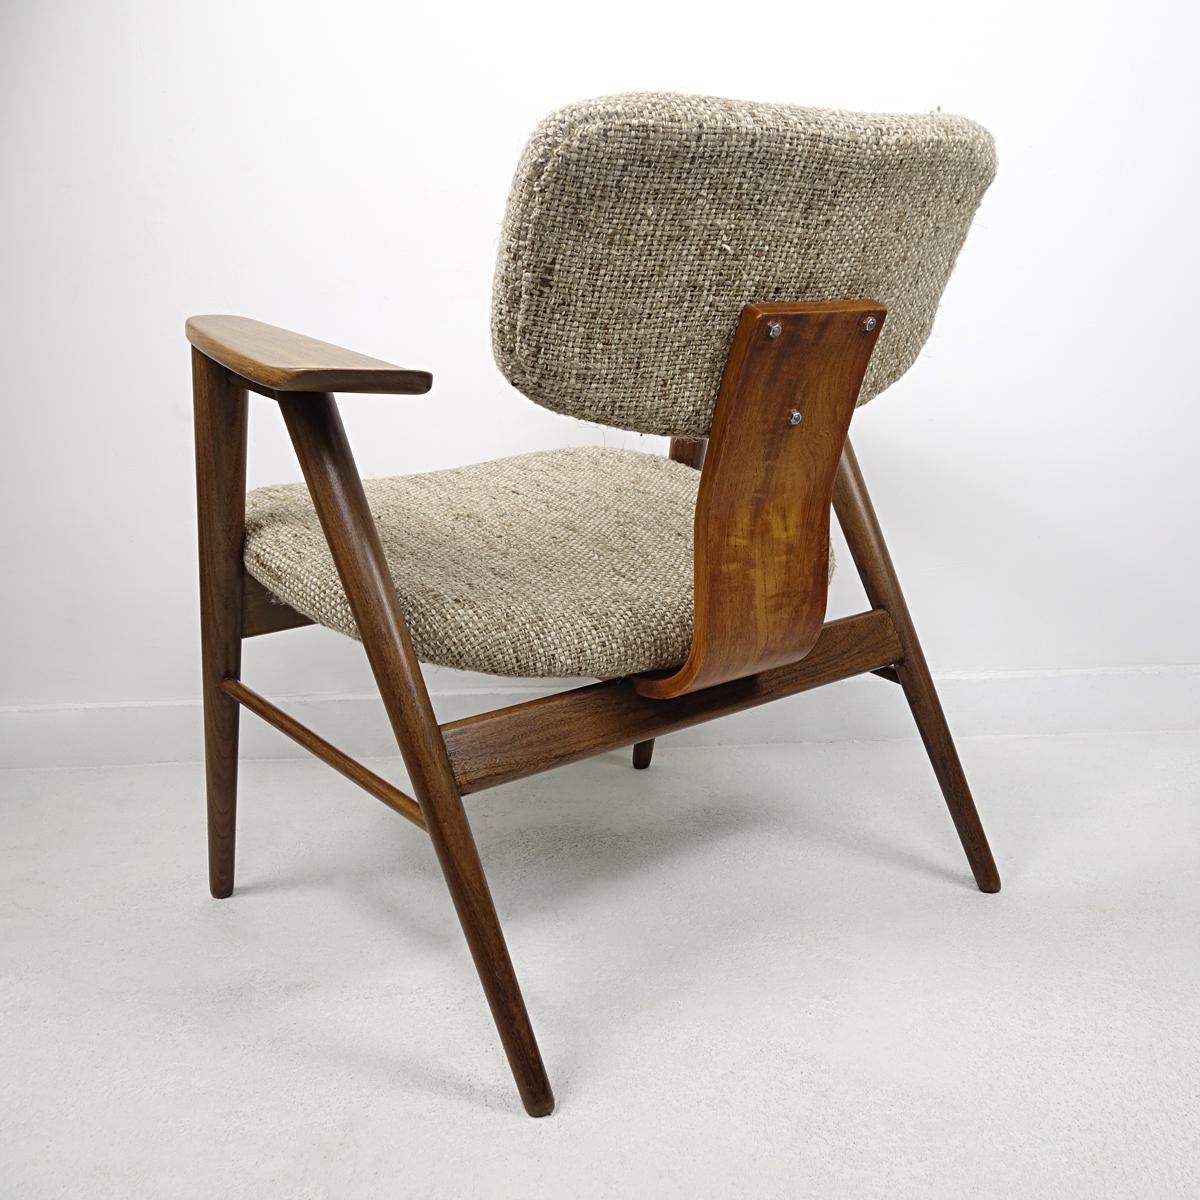 Mid-20th Century Mid-Century Modern Teak Lounge Chair FT14 by Cees Braakman for Pastoe For Sale